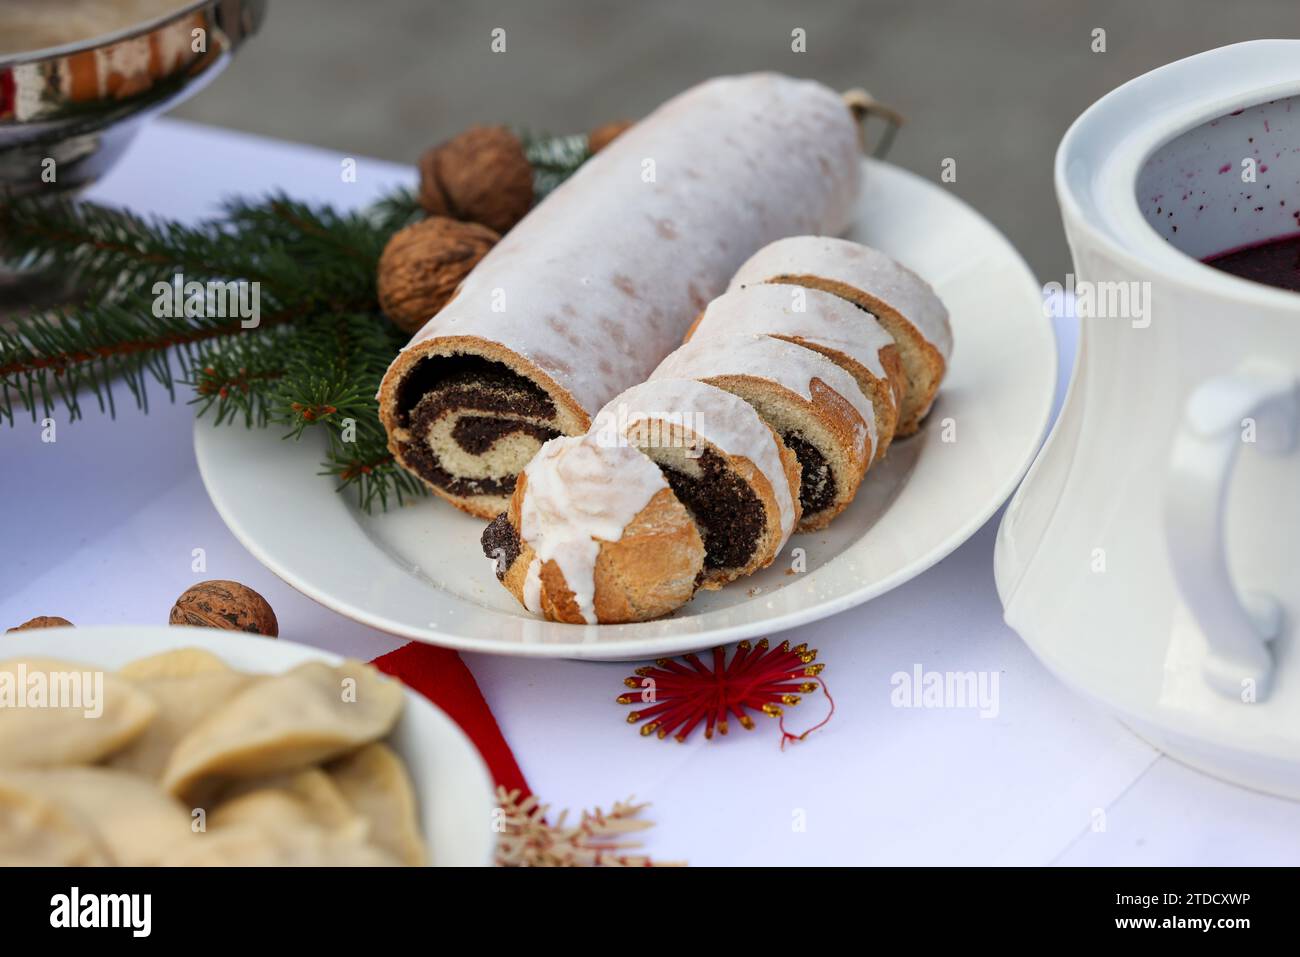 Baked roll stuffed with poppy seeds Stock Photo